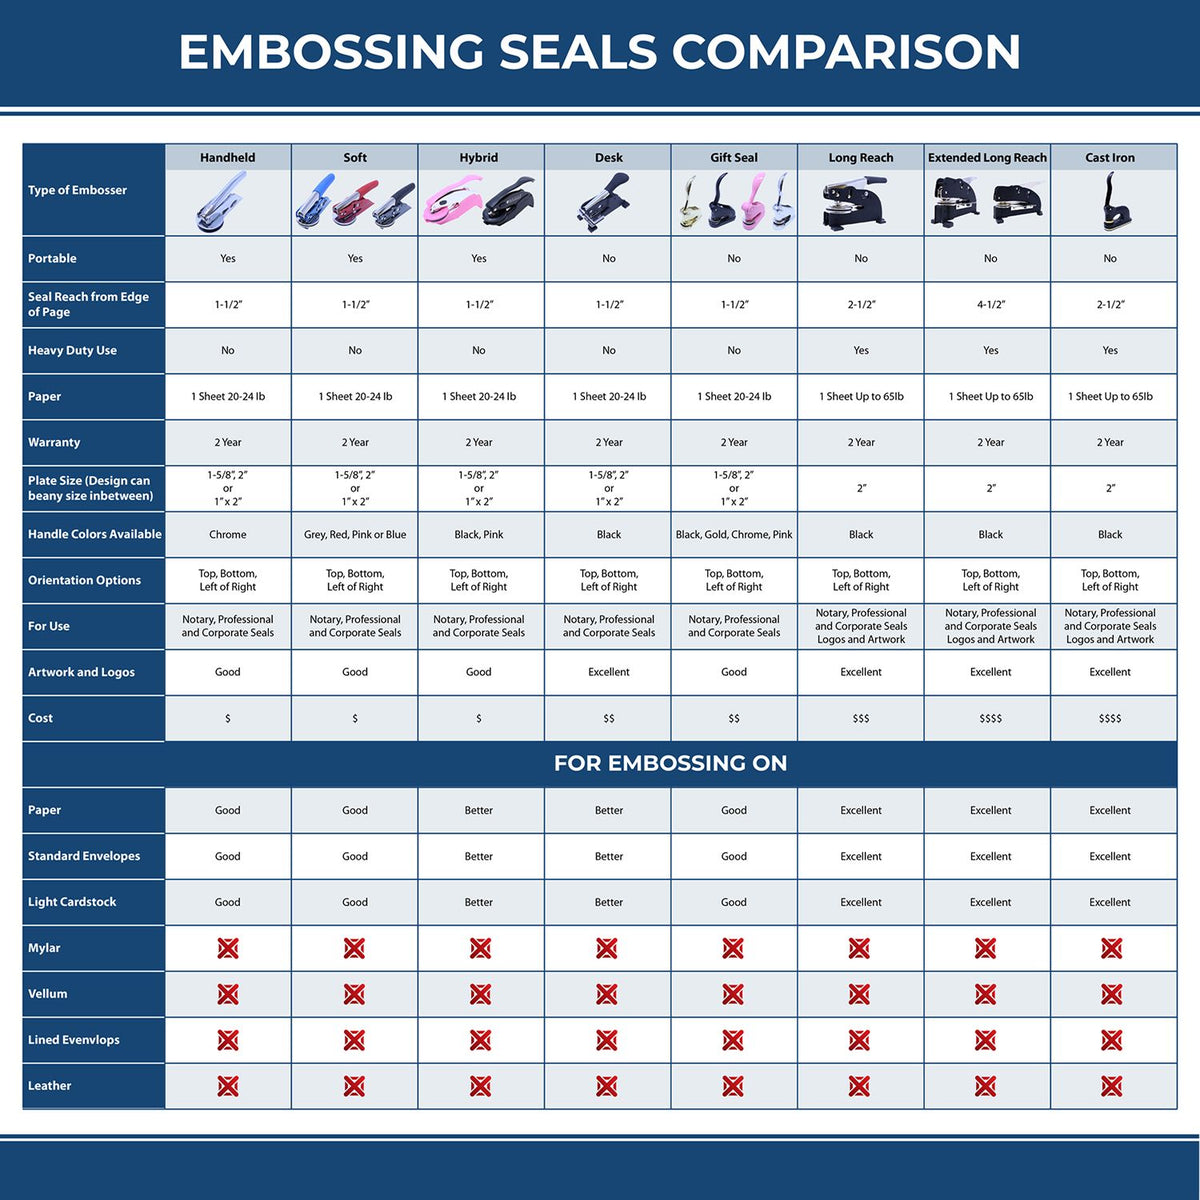 A comparison chart for the different types of mount models available for the Hybrid North Carolina Land Surveyor Seal